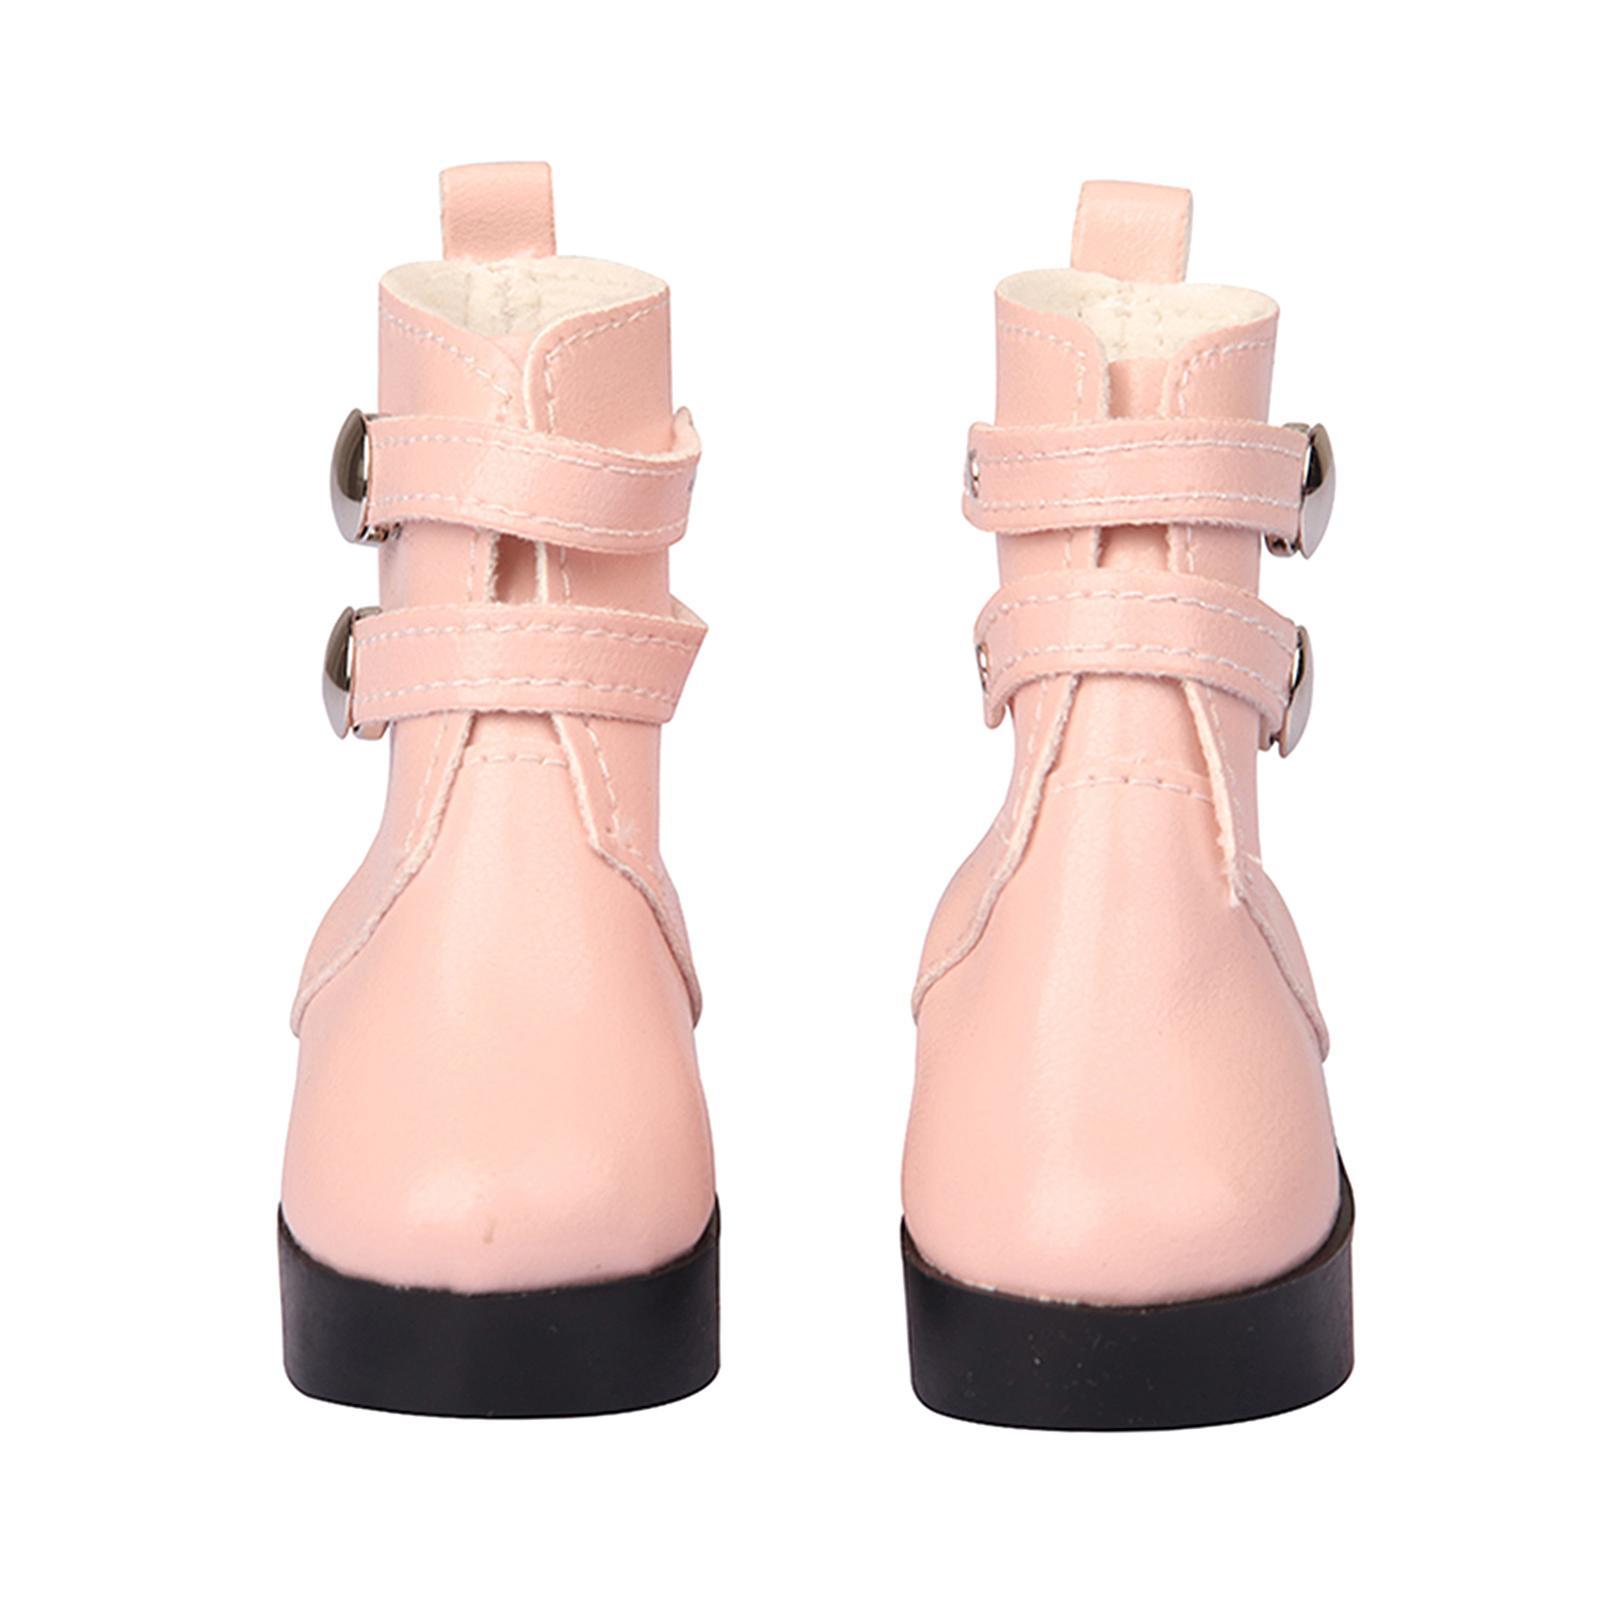 Handmade Doll PU leather Boots Shoes for 18" Inch American Doll Accs Pink